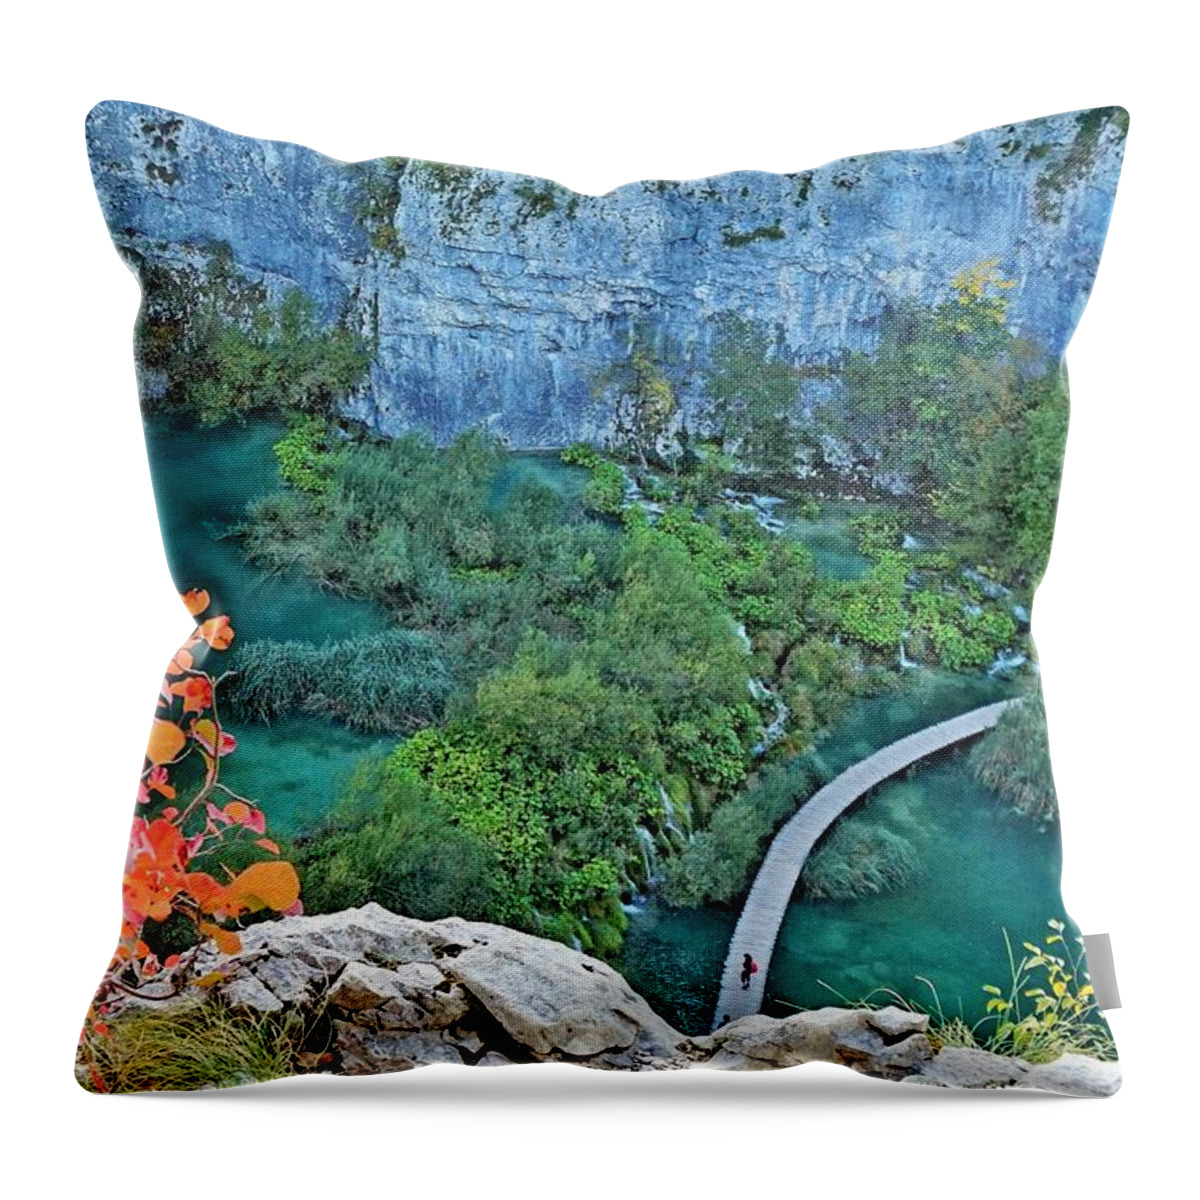 Plitvice Lakes Throw Pillow featuring the photograph Plitvice Lakes View From Above by Yvonne Jasinski